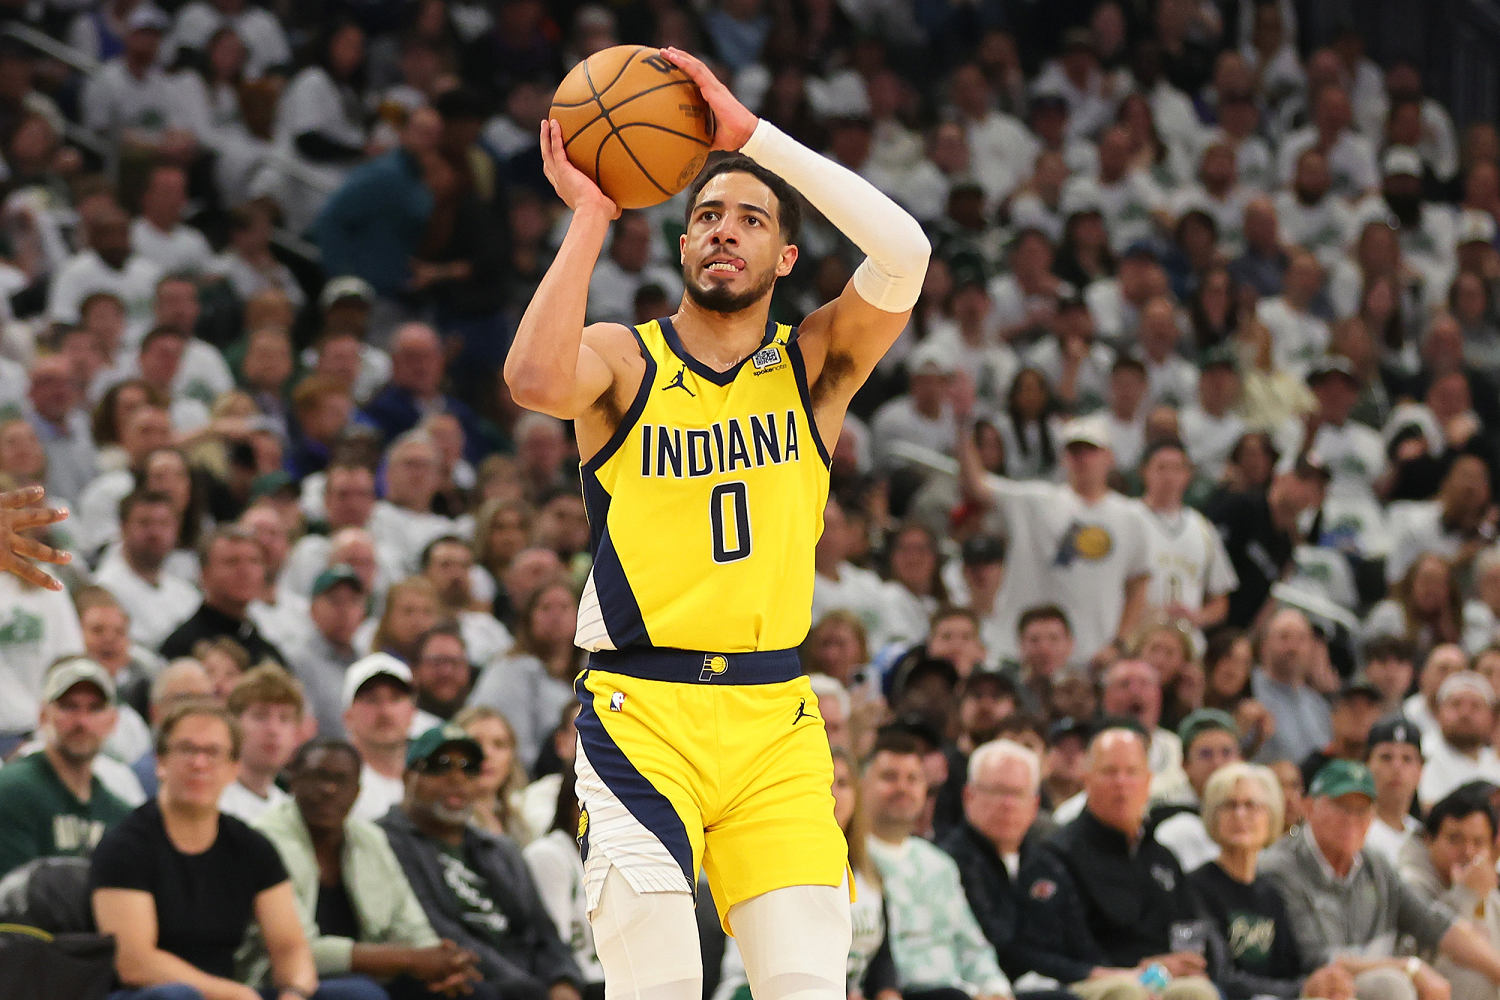 Pacers' star Tyrese Haliburton says rival fan directed racist slur at his brother during playoff game